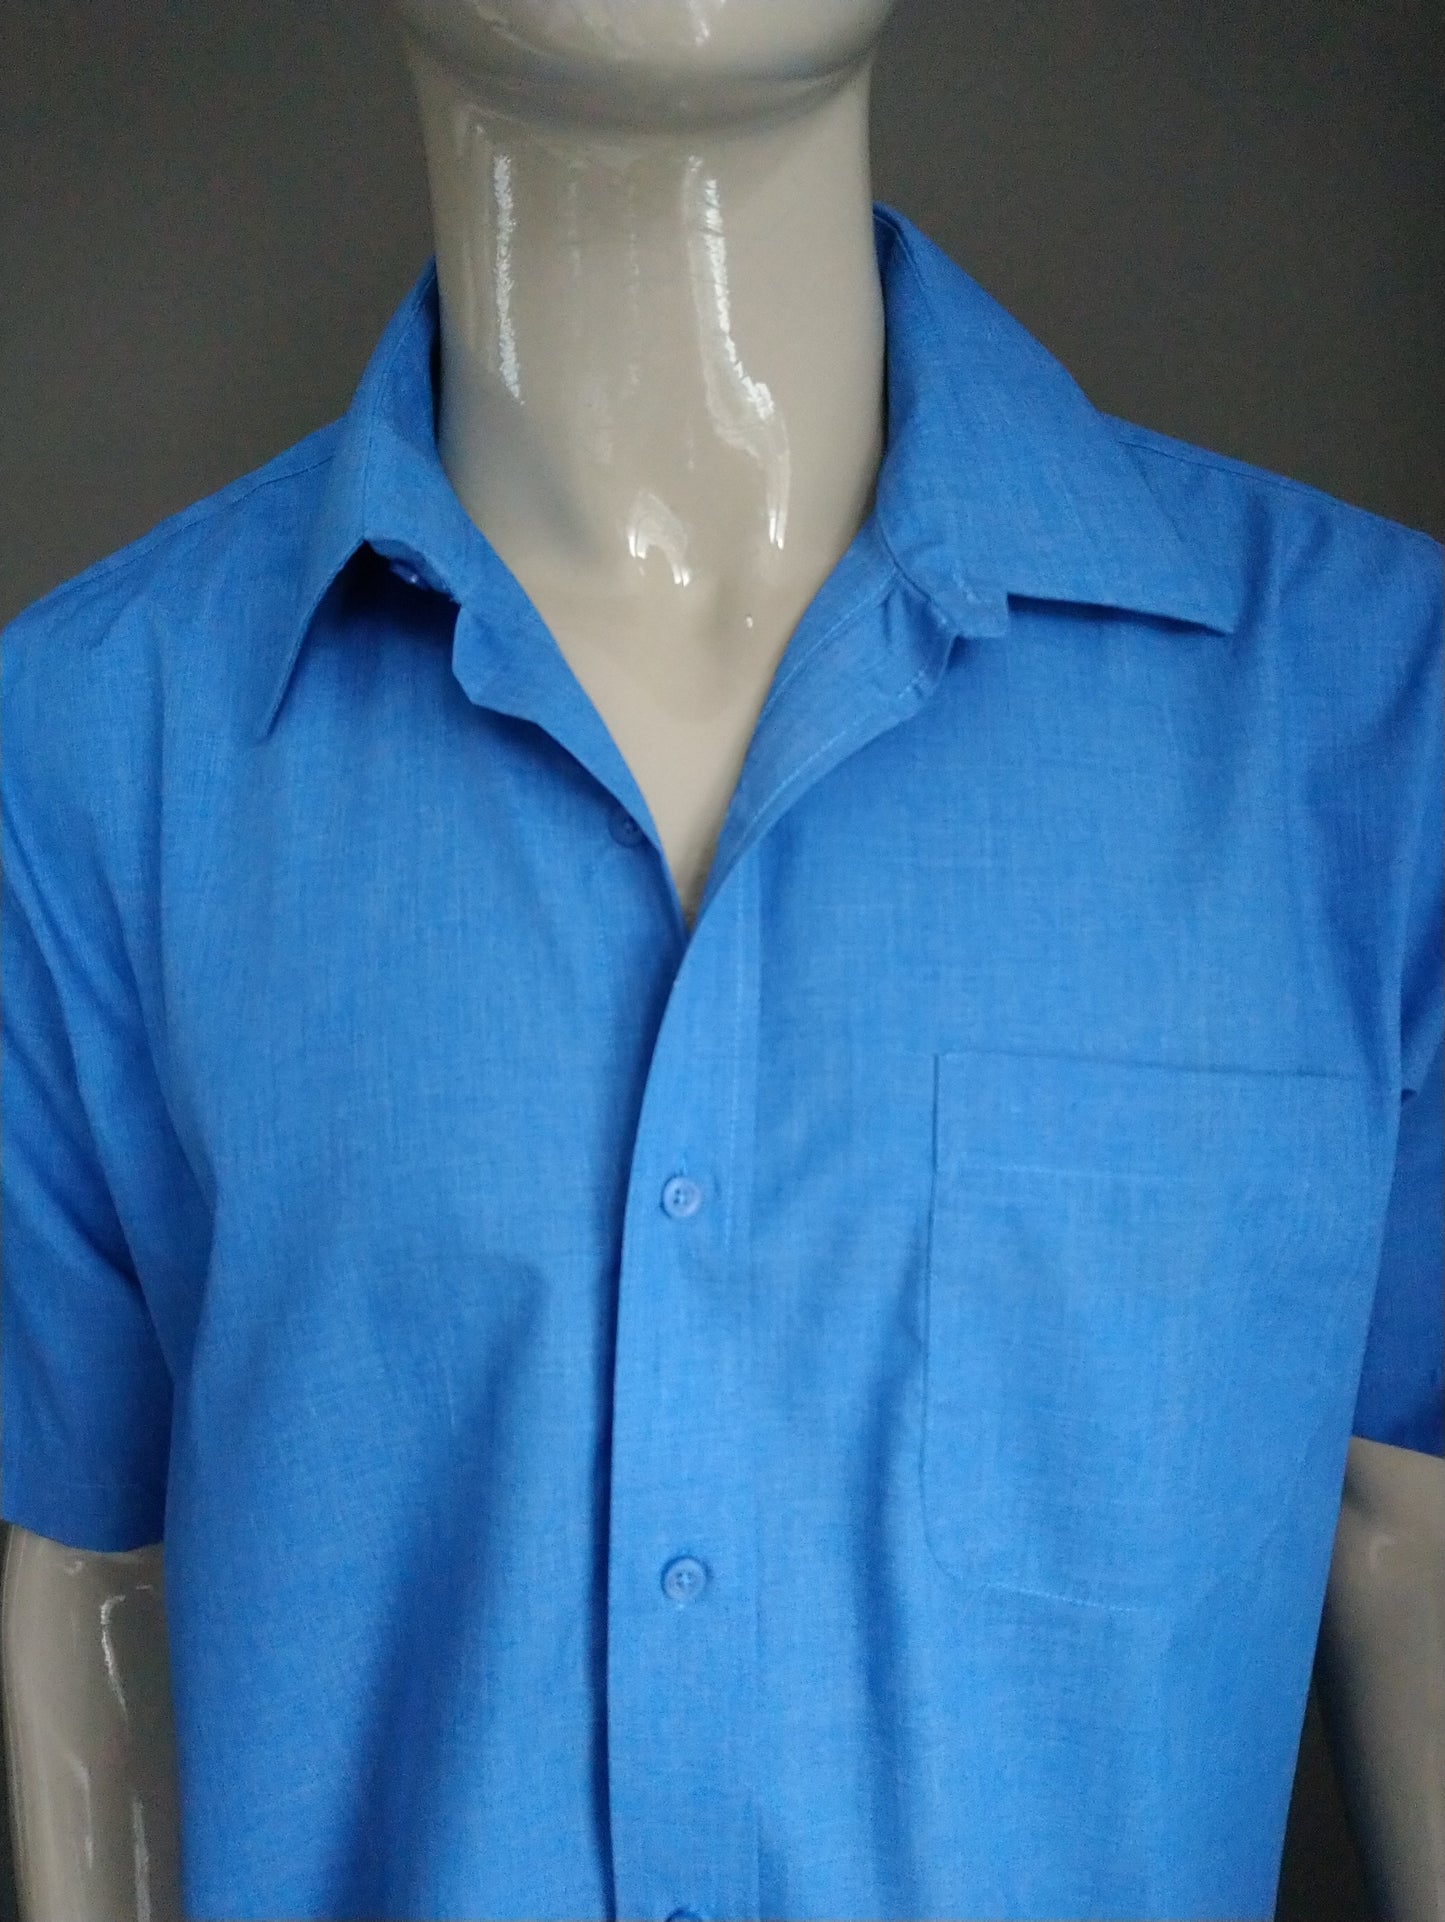 George Shirt Sleeve. Couleur bleue. Taille xl.